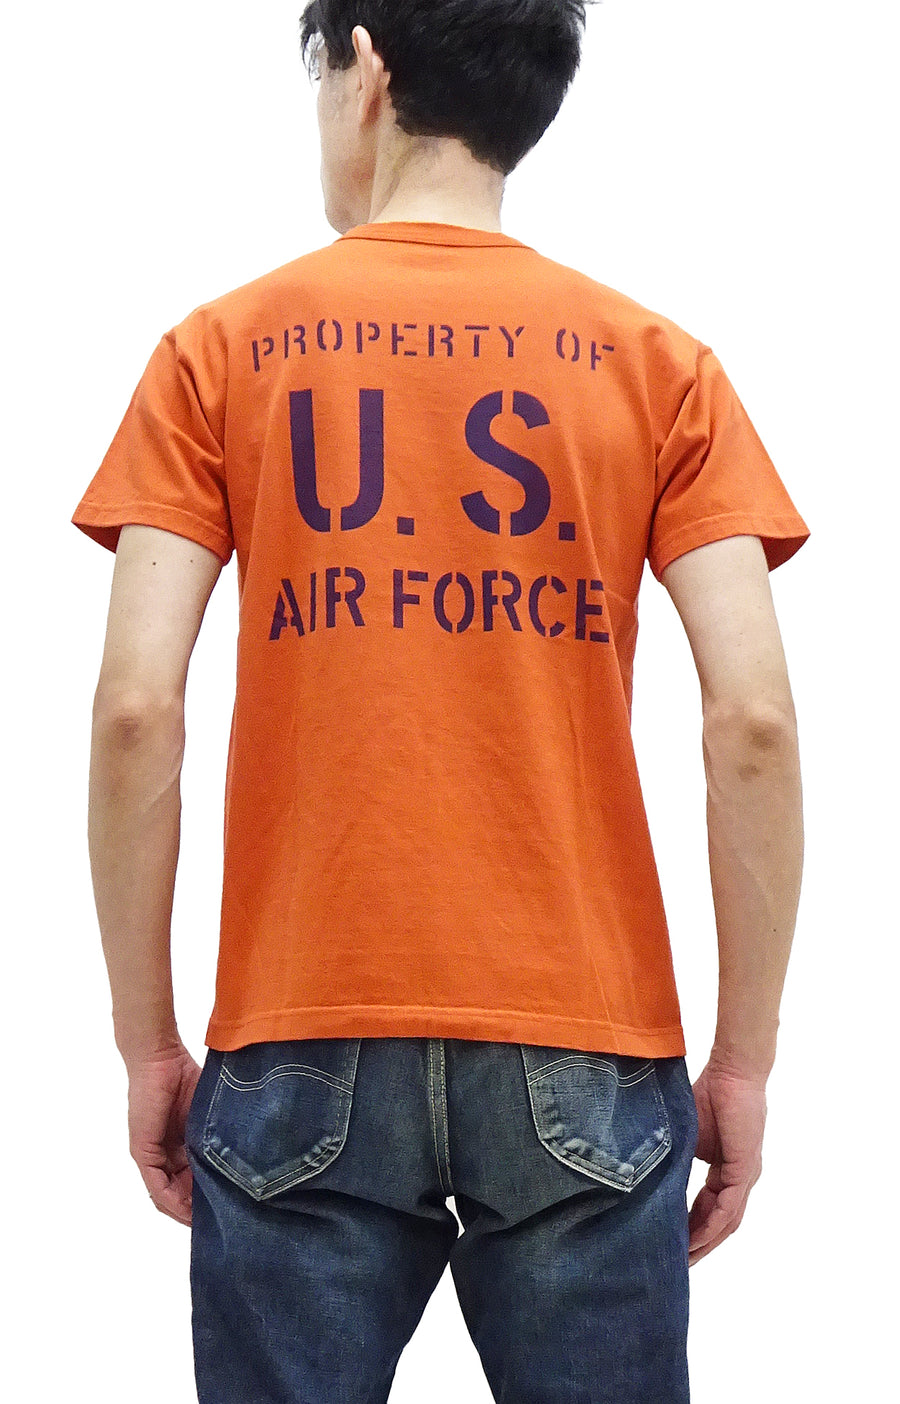 TOYS McCOY T-shirt Men's US Fifth Air Force Military Graphic Short Sleeve Loopwheeled Tee TMC2428 070 Faded-Orange